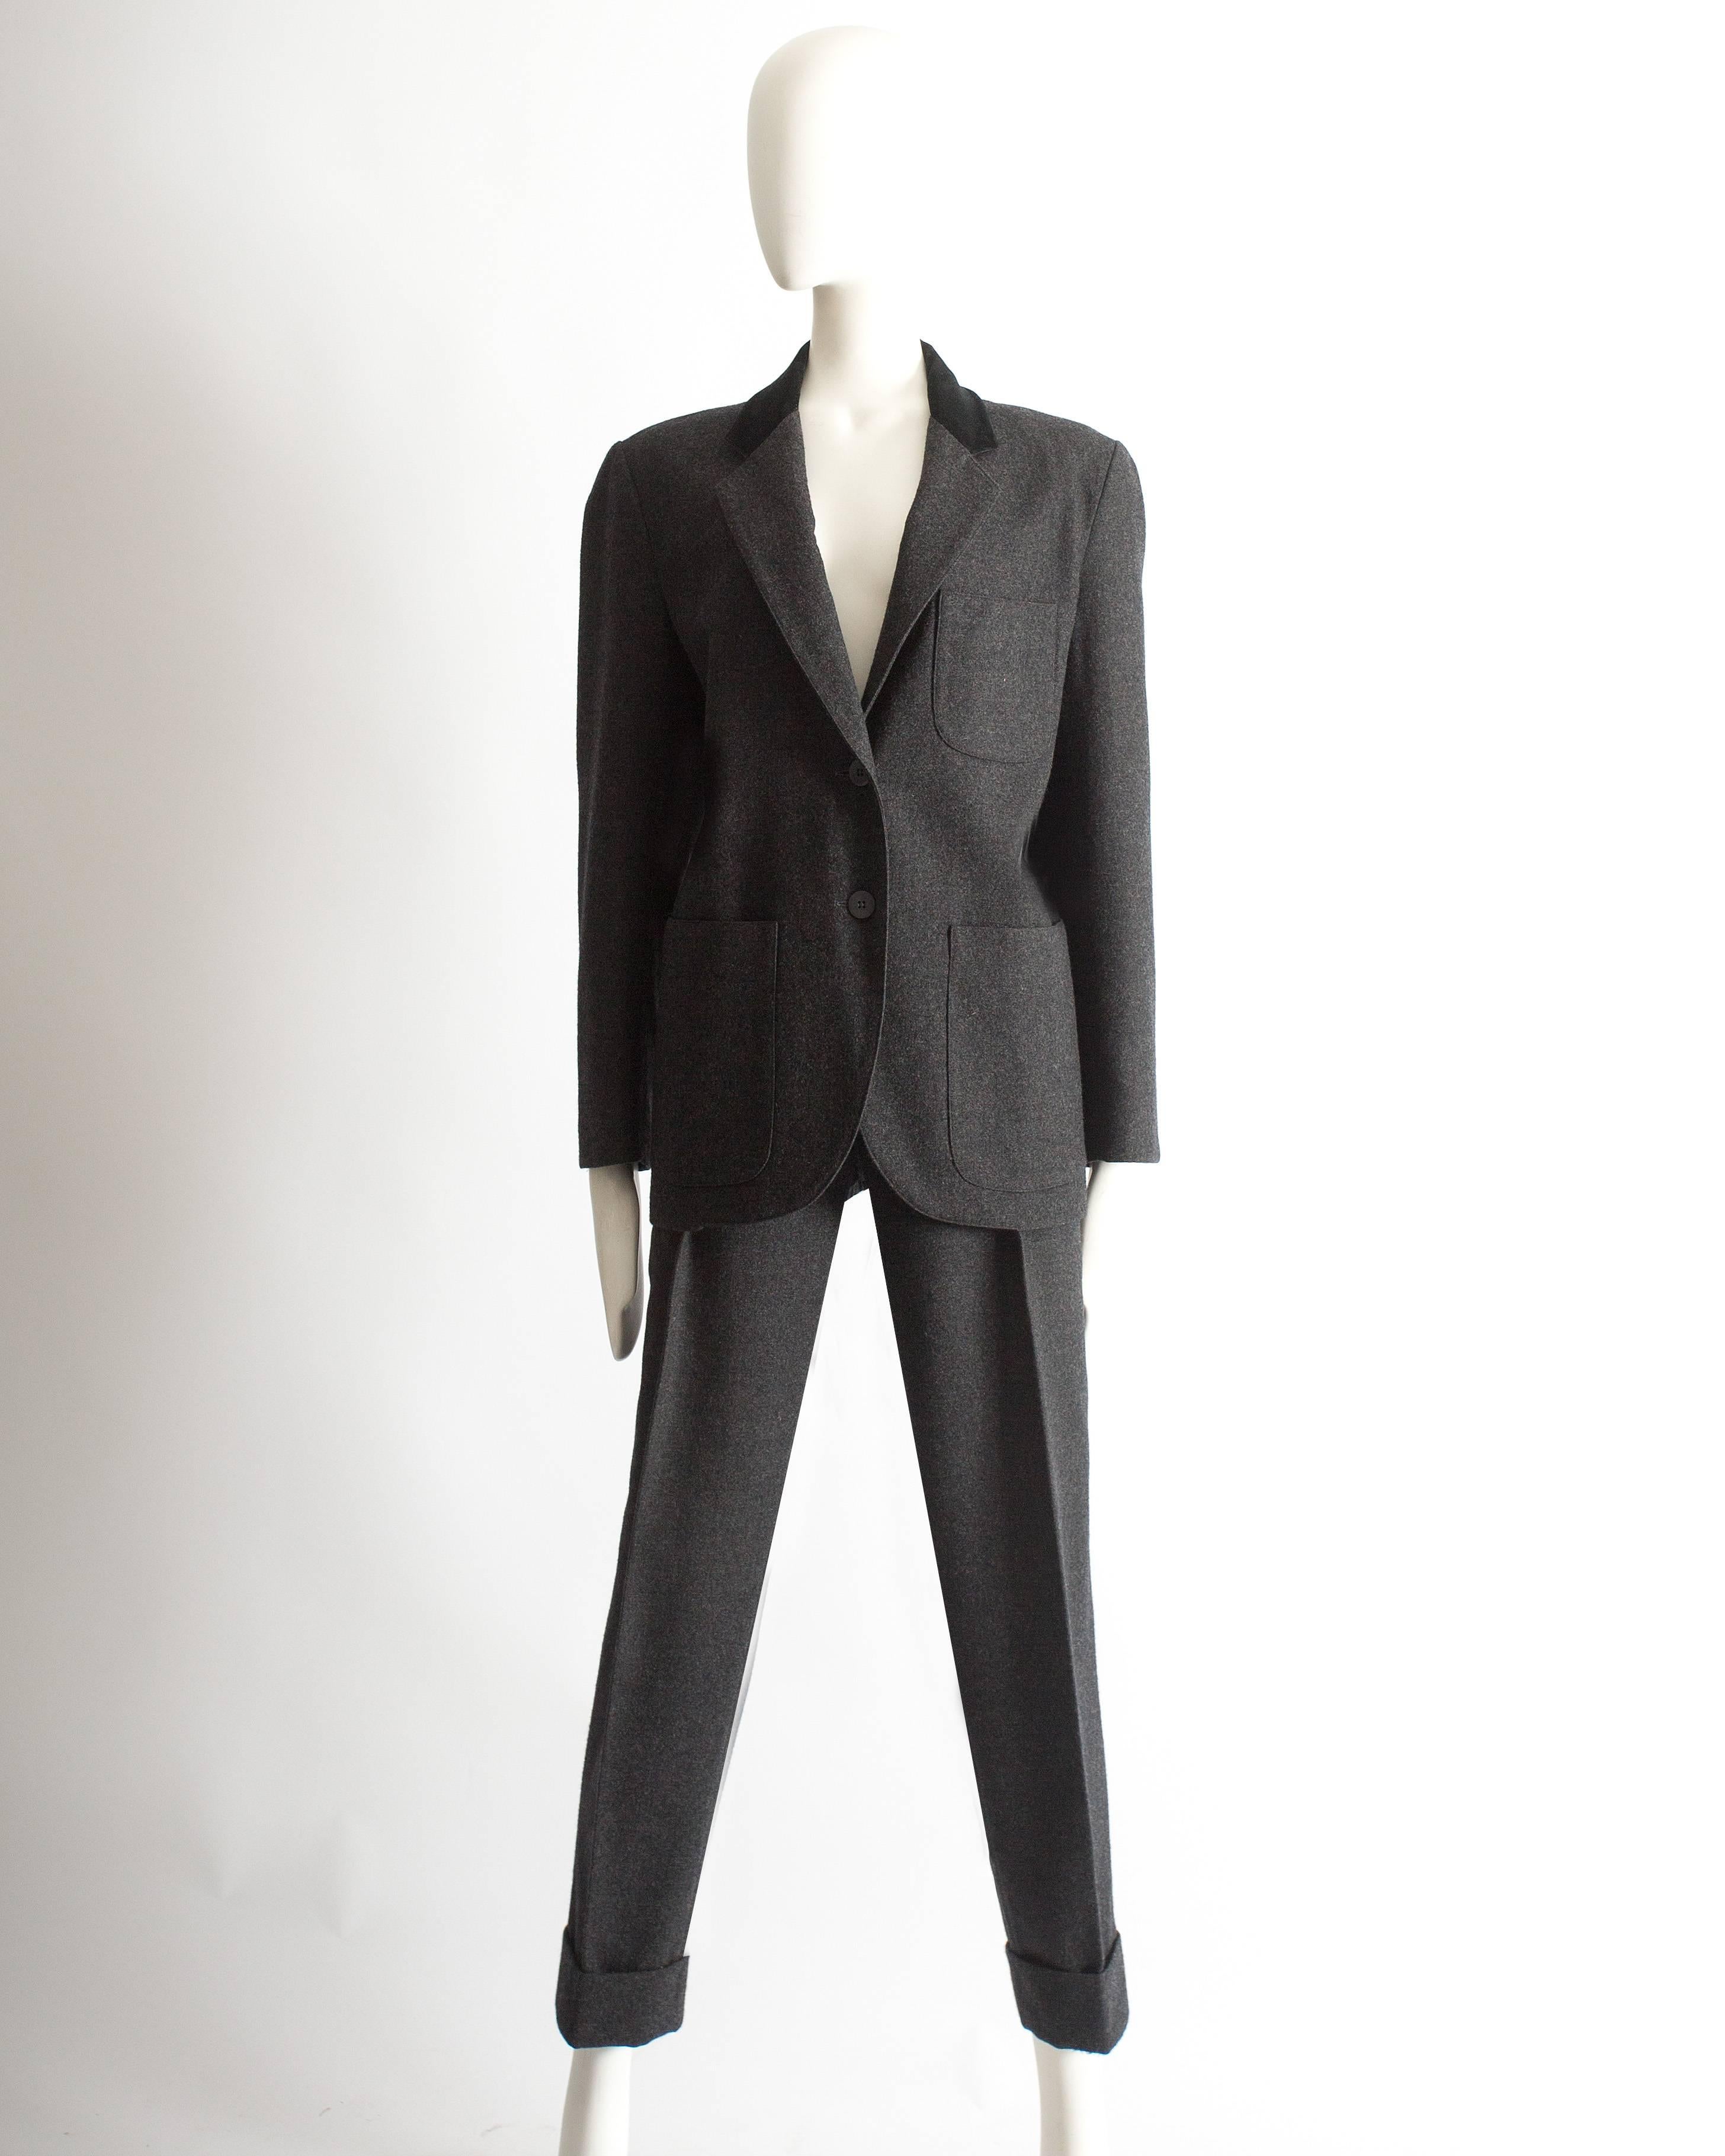 Presenting an exquisite Azzedine Alaia charcoal grey molten wool trouser suit, a true masterpiece from the autumn-winter 1987 collection. This suit exemplifies the designer's impeccable tailoring and timeless style.

The boxy cut jacket, with its